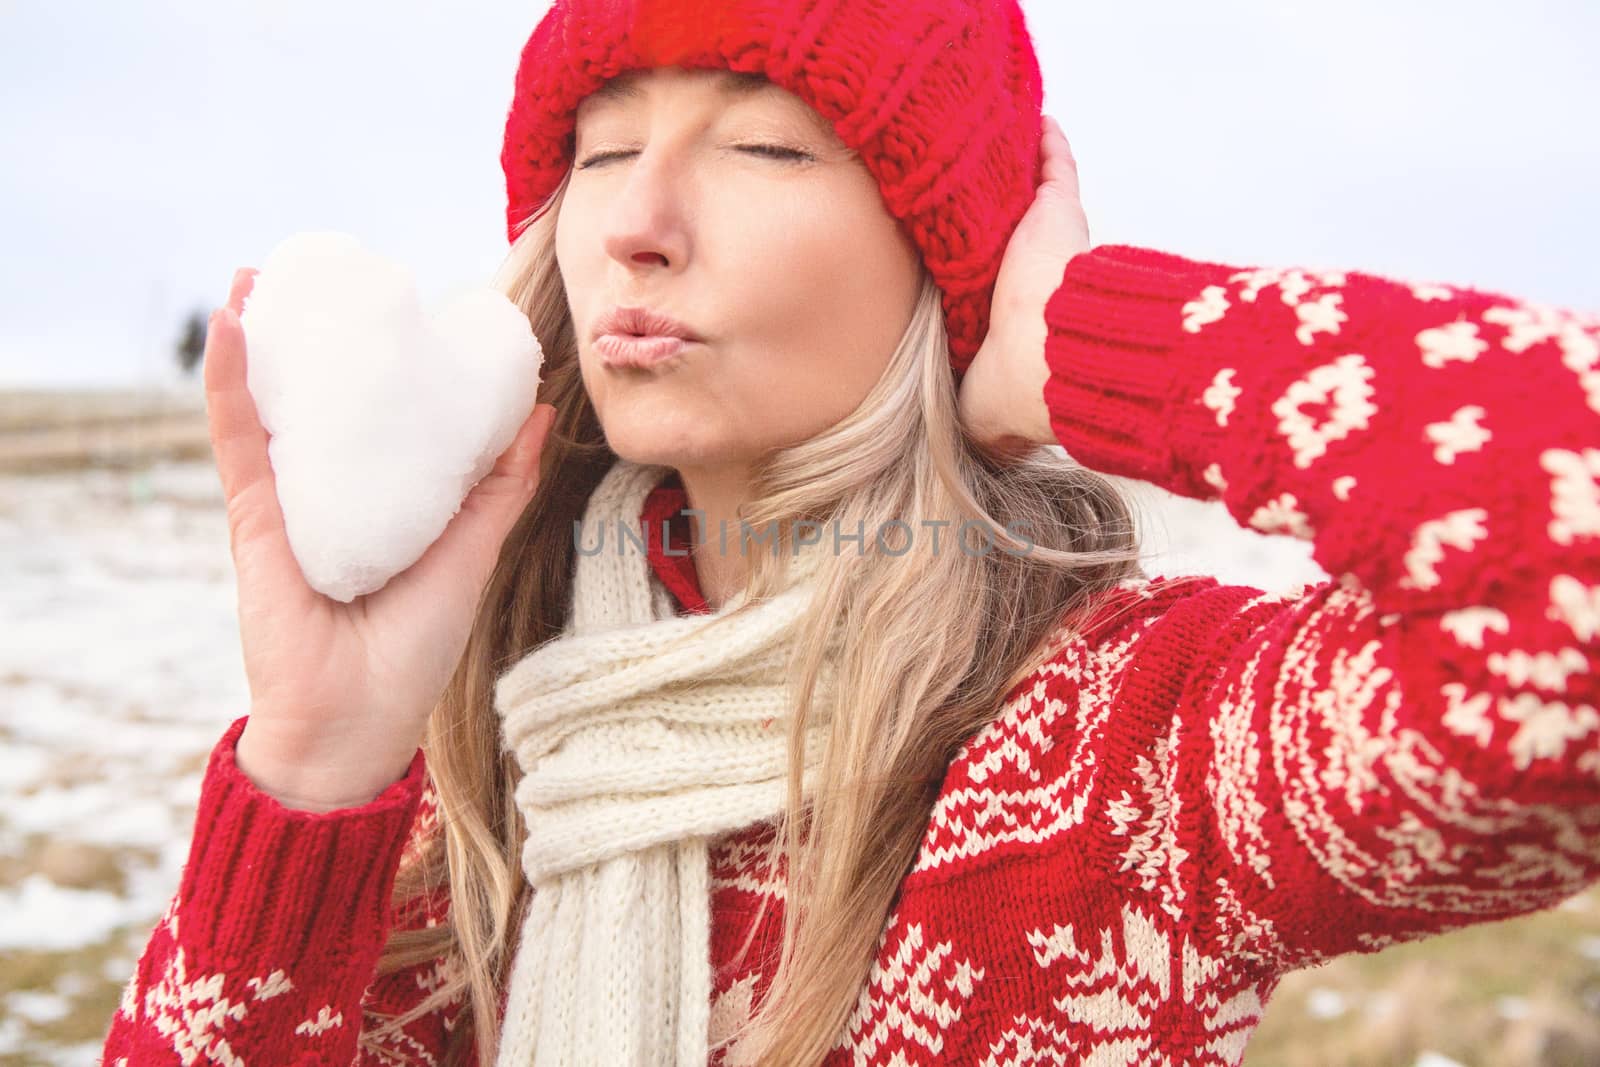 Female holding snowball in shape of heart blowing kisses by lovleah